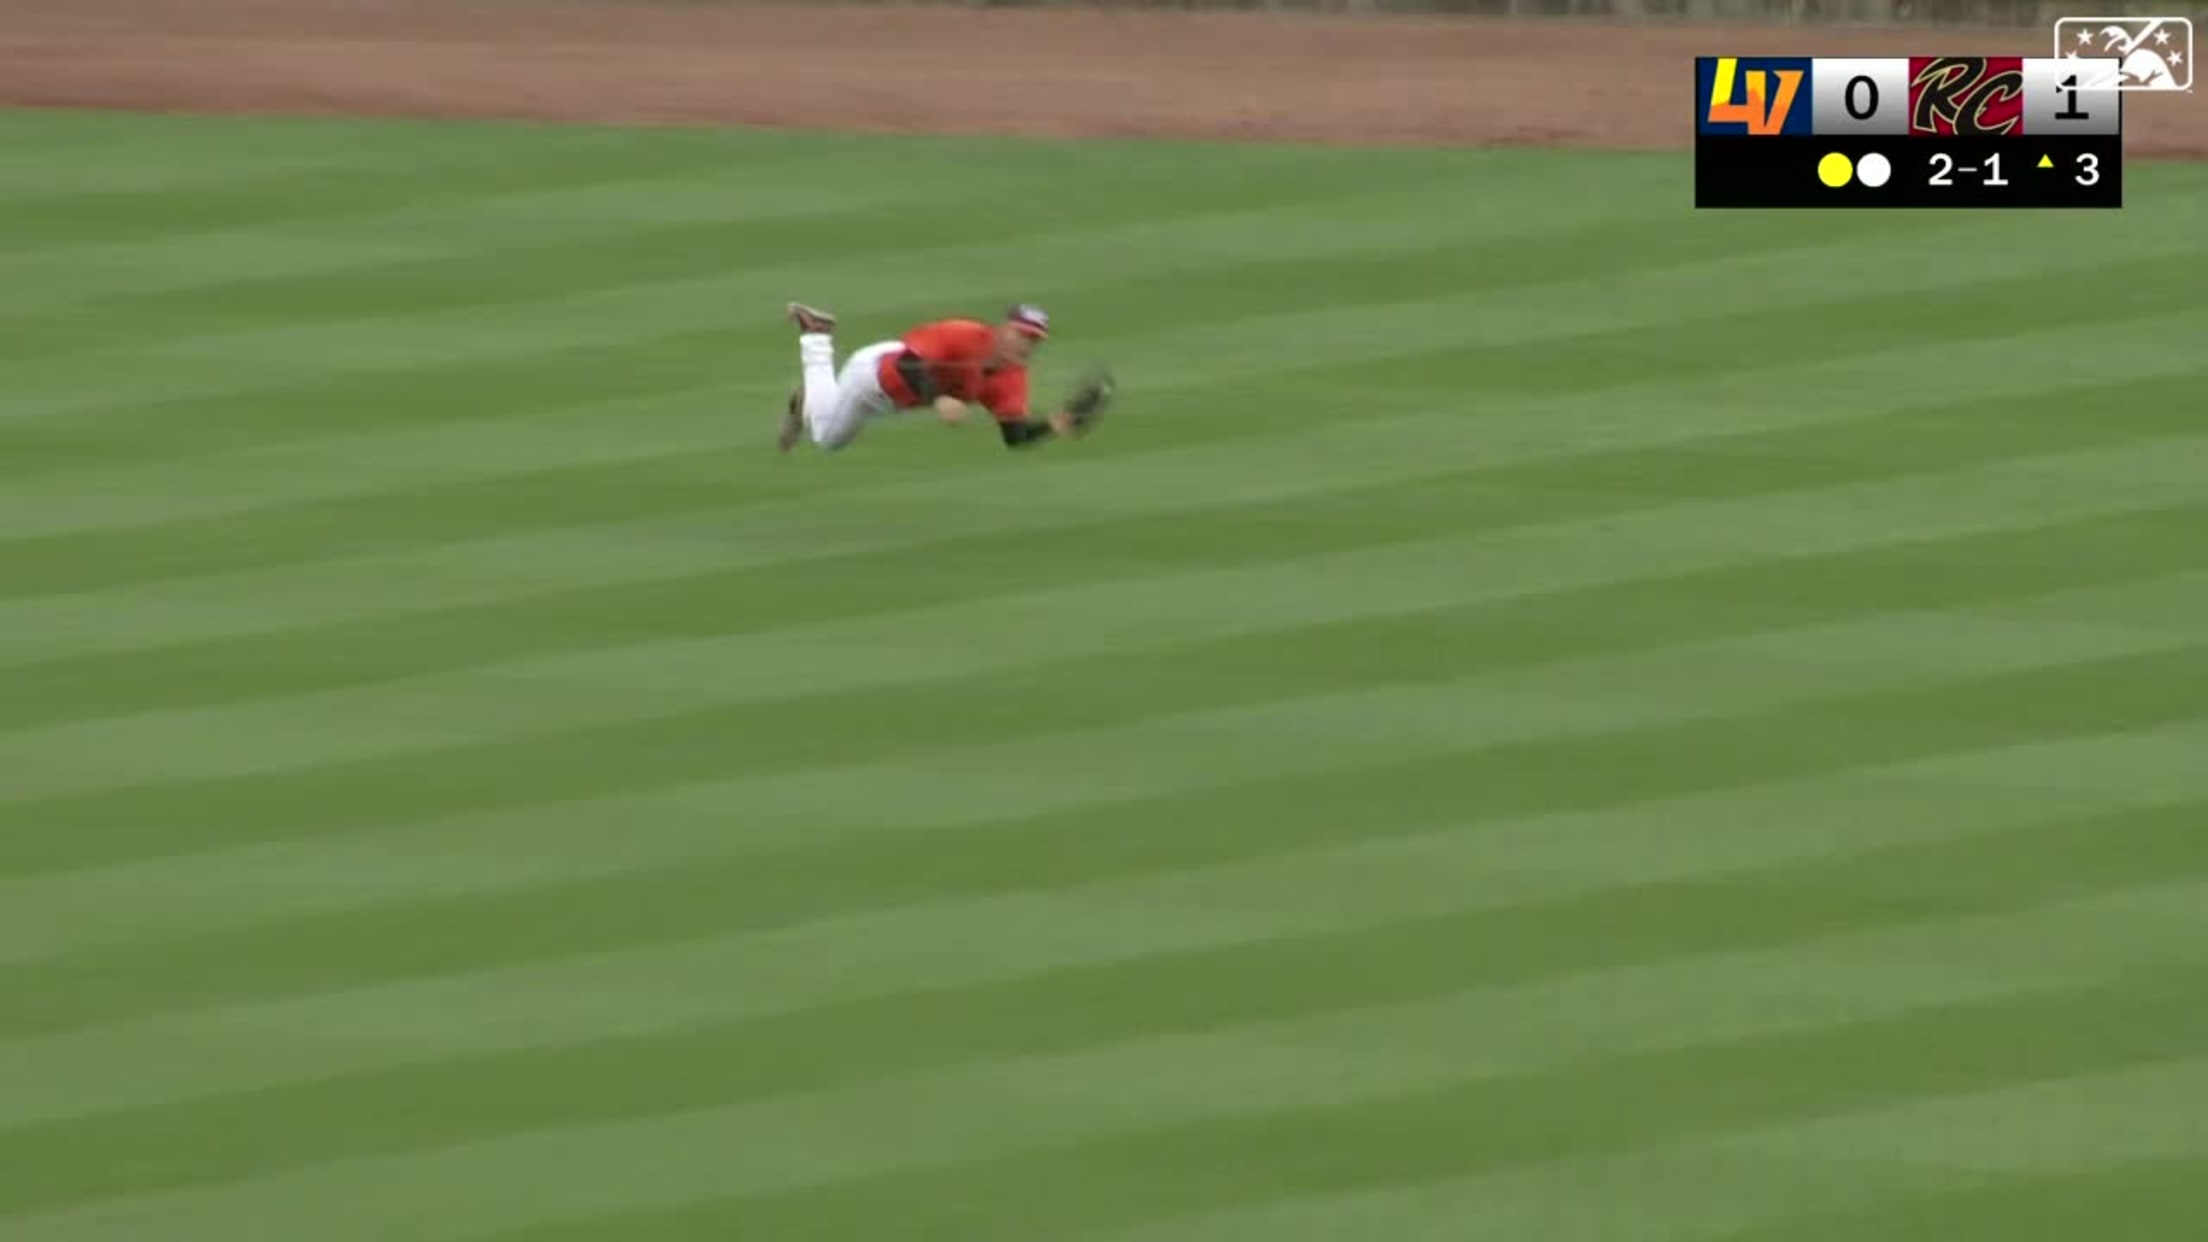 Shane Matheny's diving catch